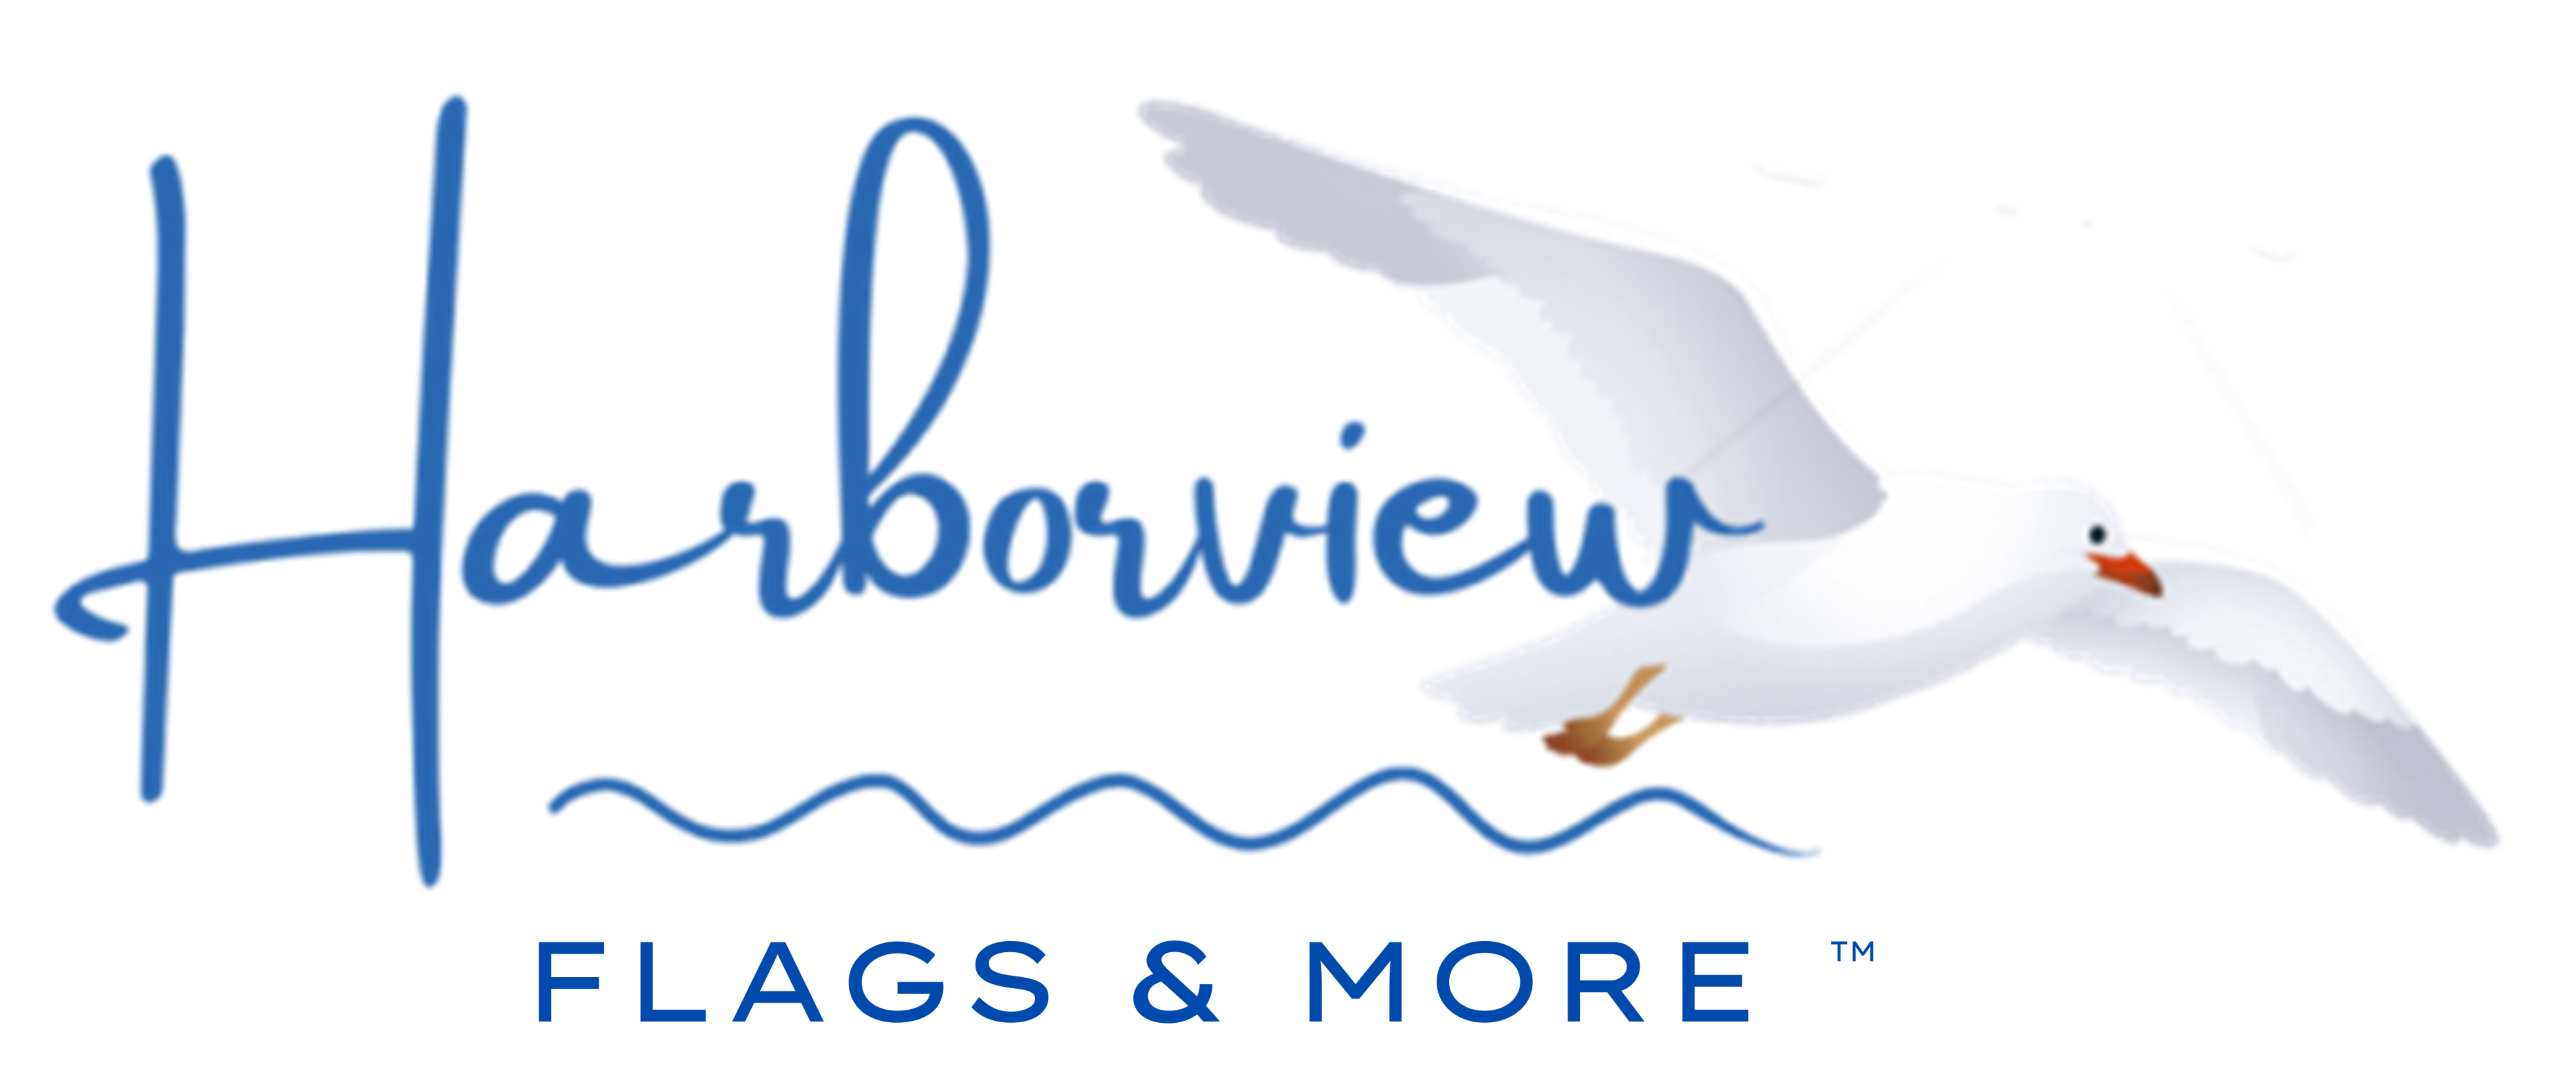 Harborview Flags and More new logo